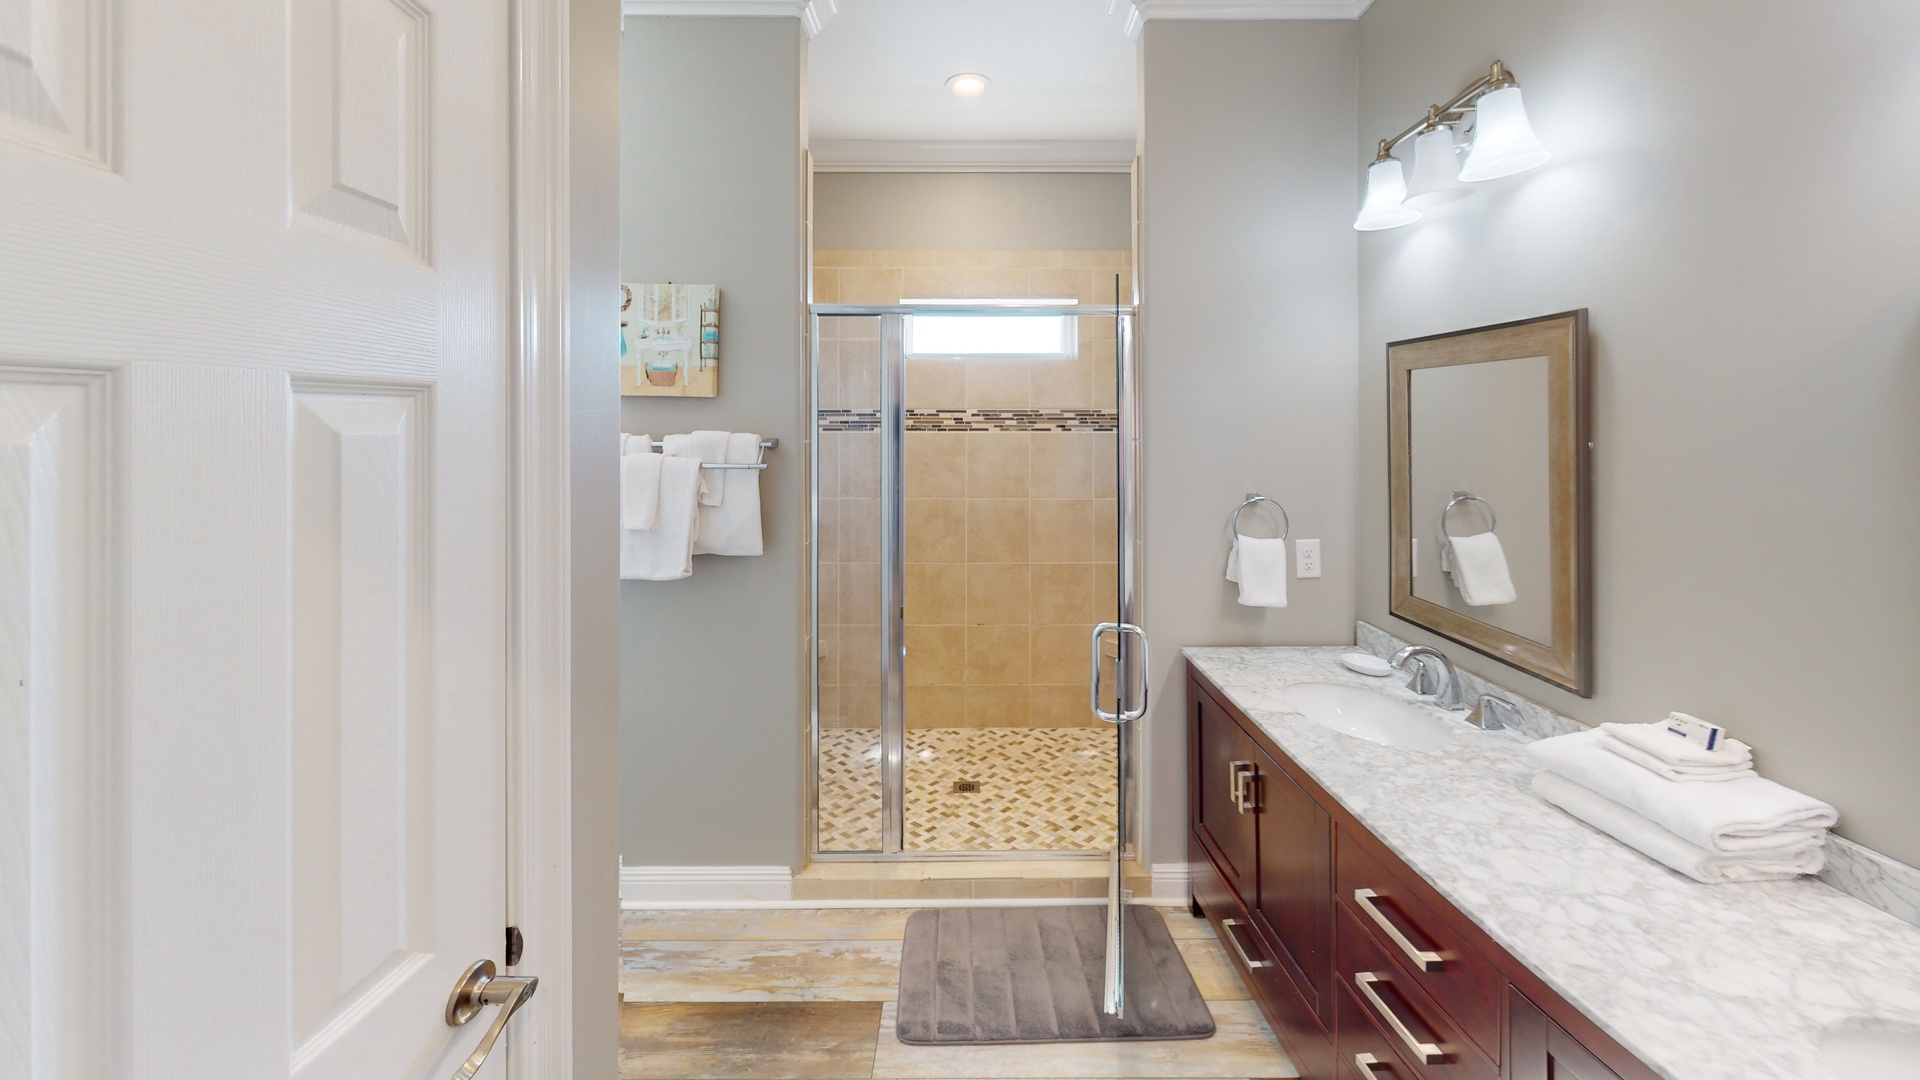 The 2nd master features a double vanity, walk-in shower and a soaking tub